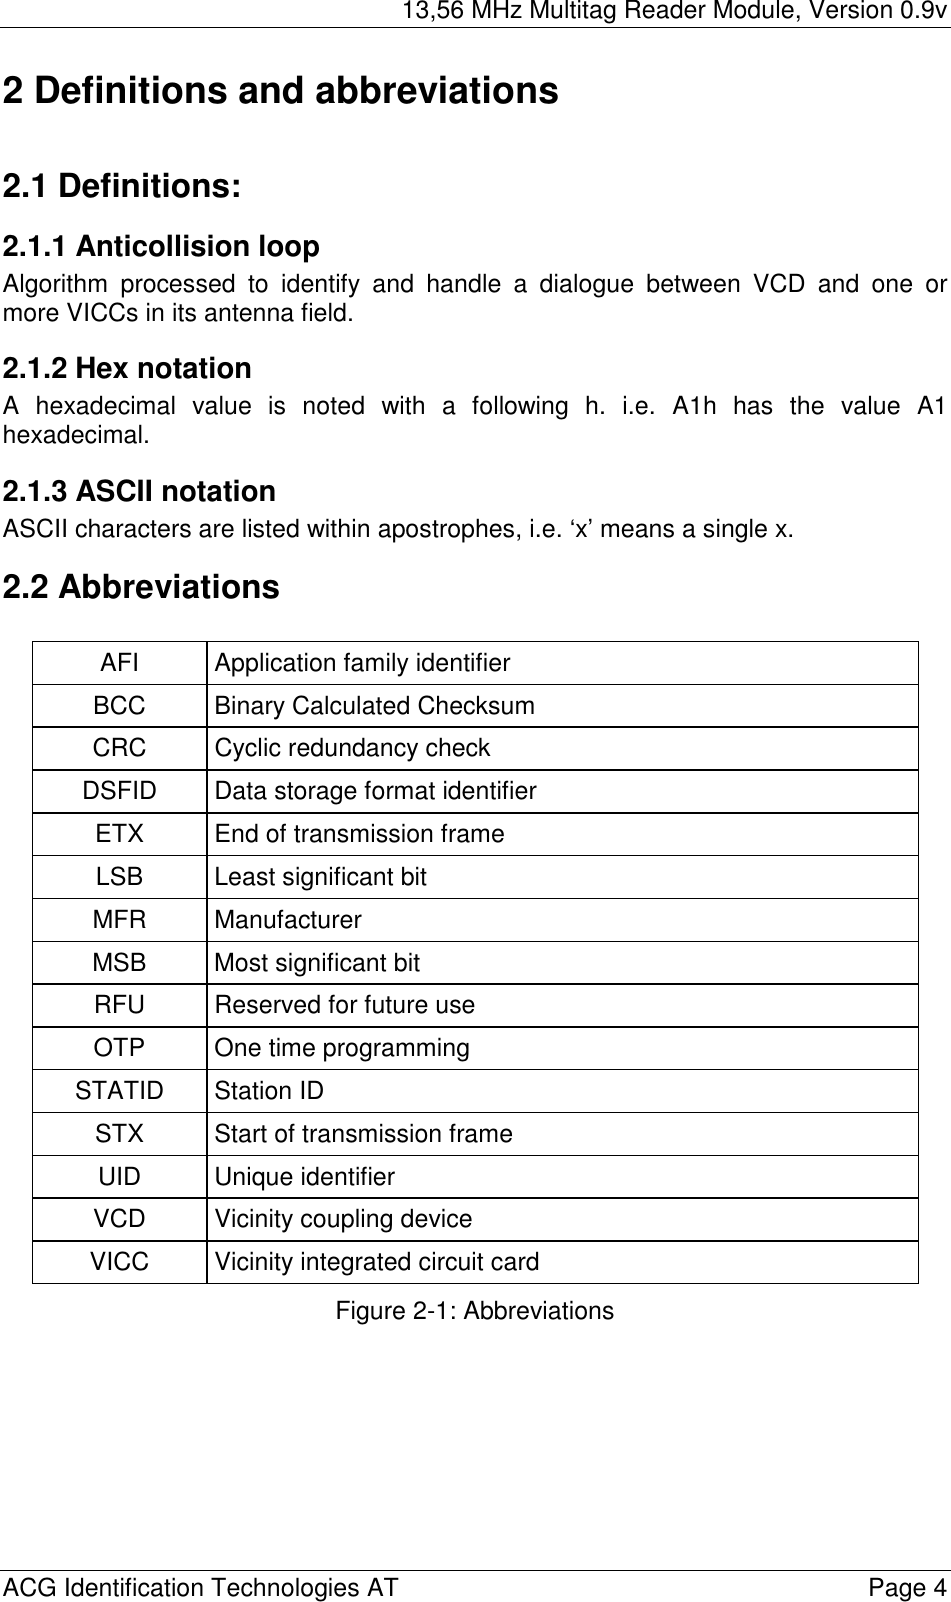 13,56 MHz Multitag Reader Module, Version 0.9v  ACG Identification Technologies AT    Page 4 2 Definitions and abbreviations  2.1 Definitions: 2.1.1 Anticollision loop Algorithm processed to identify and handle a dialogue between VCD and one or more VICCs in its antenna field. 2.1.2 Hex notation A hexadecimal value is noted with a following h. i.e. A1h has the value A1 hexadecimal. 2.1.3 ASCII notation ASCII characters are listed within apostrophes, i.e. ‘x’ means a single x. 2.2 Abbreviations  AFI Application family identifier BCC  Binary Calculated Checksum CRC  Cyclic redundancy check DSFID  Data storage format identifier ETX  End of transmission frame LSB  Least significant bit MFR Manufacturer MSB  Most significant bit RFU  Reserved for future use OTP One time programming STATID Station ID STX  Start of transmission frame UID Unique identifier VCD  Vicinity coupling device VICC  Vicinity integrated circuit card Figure 2-1: Abbreviations   